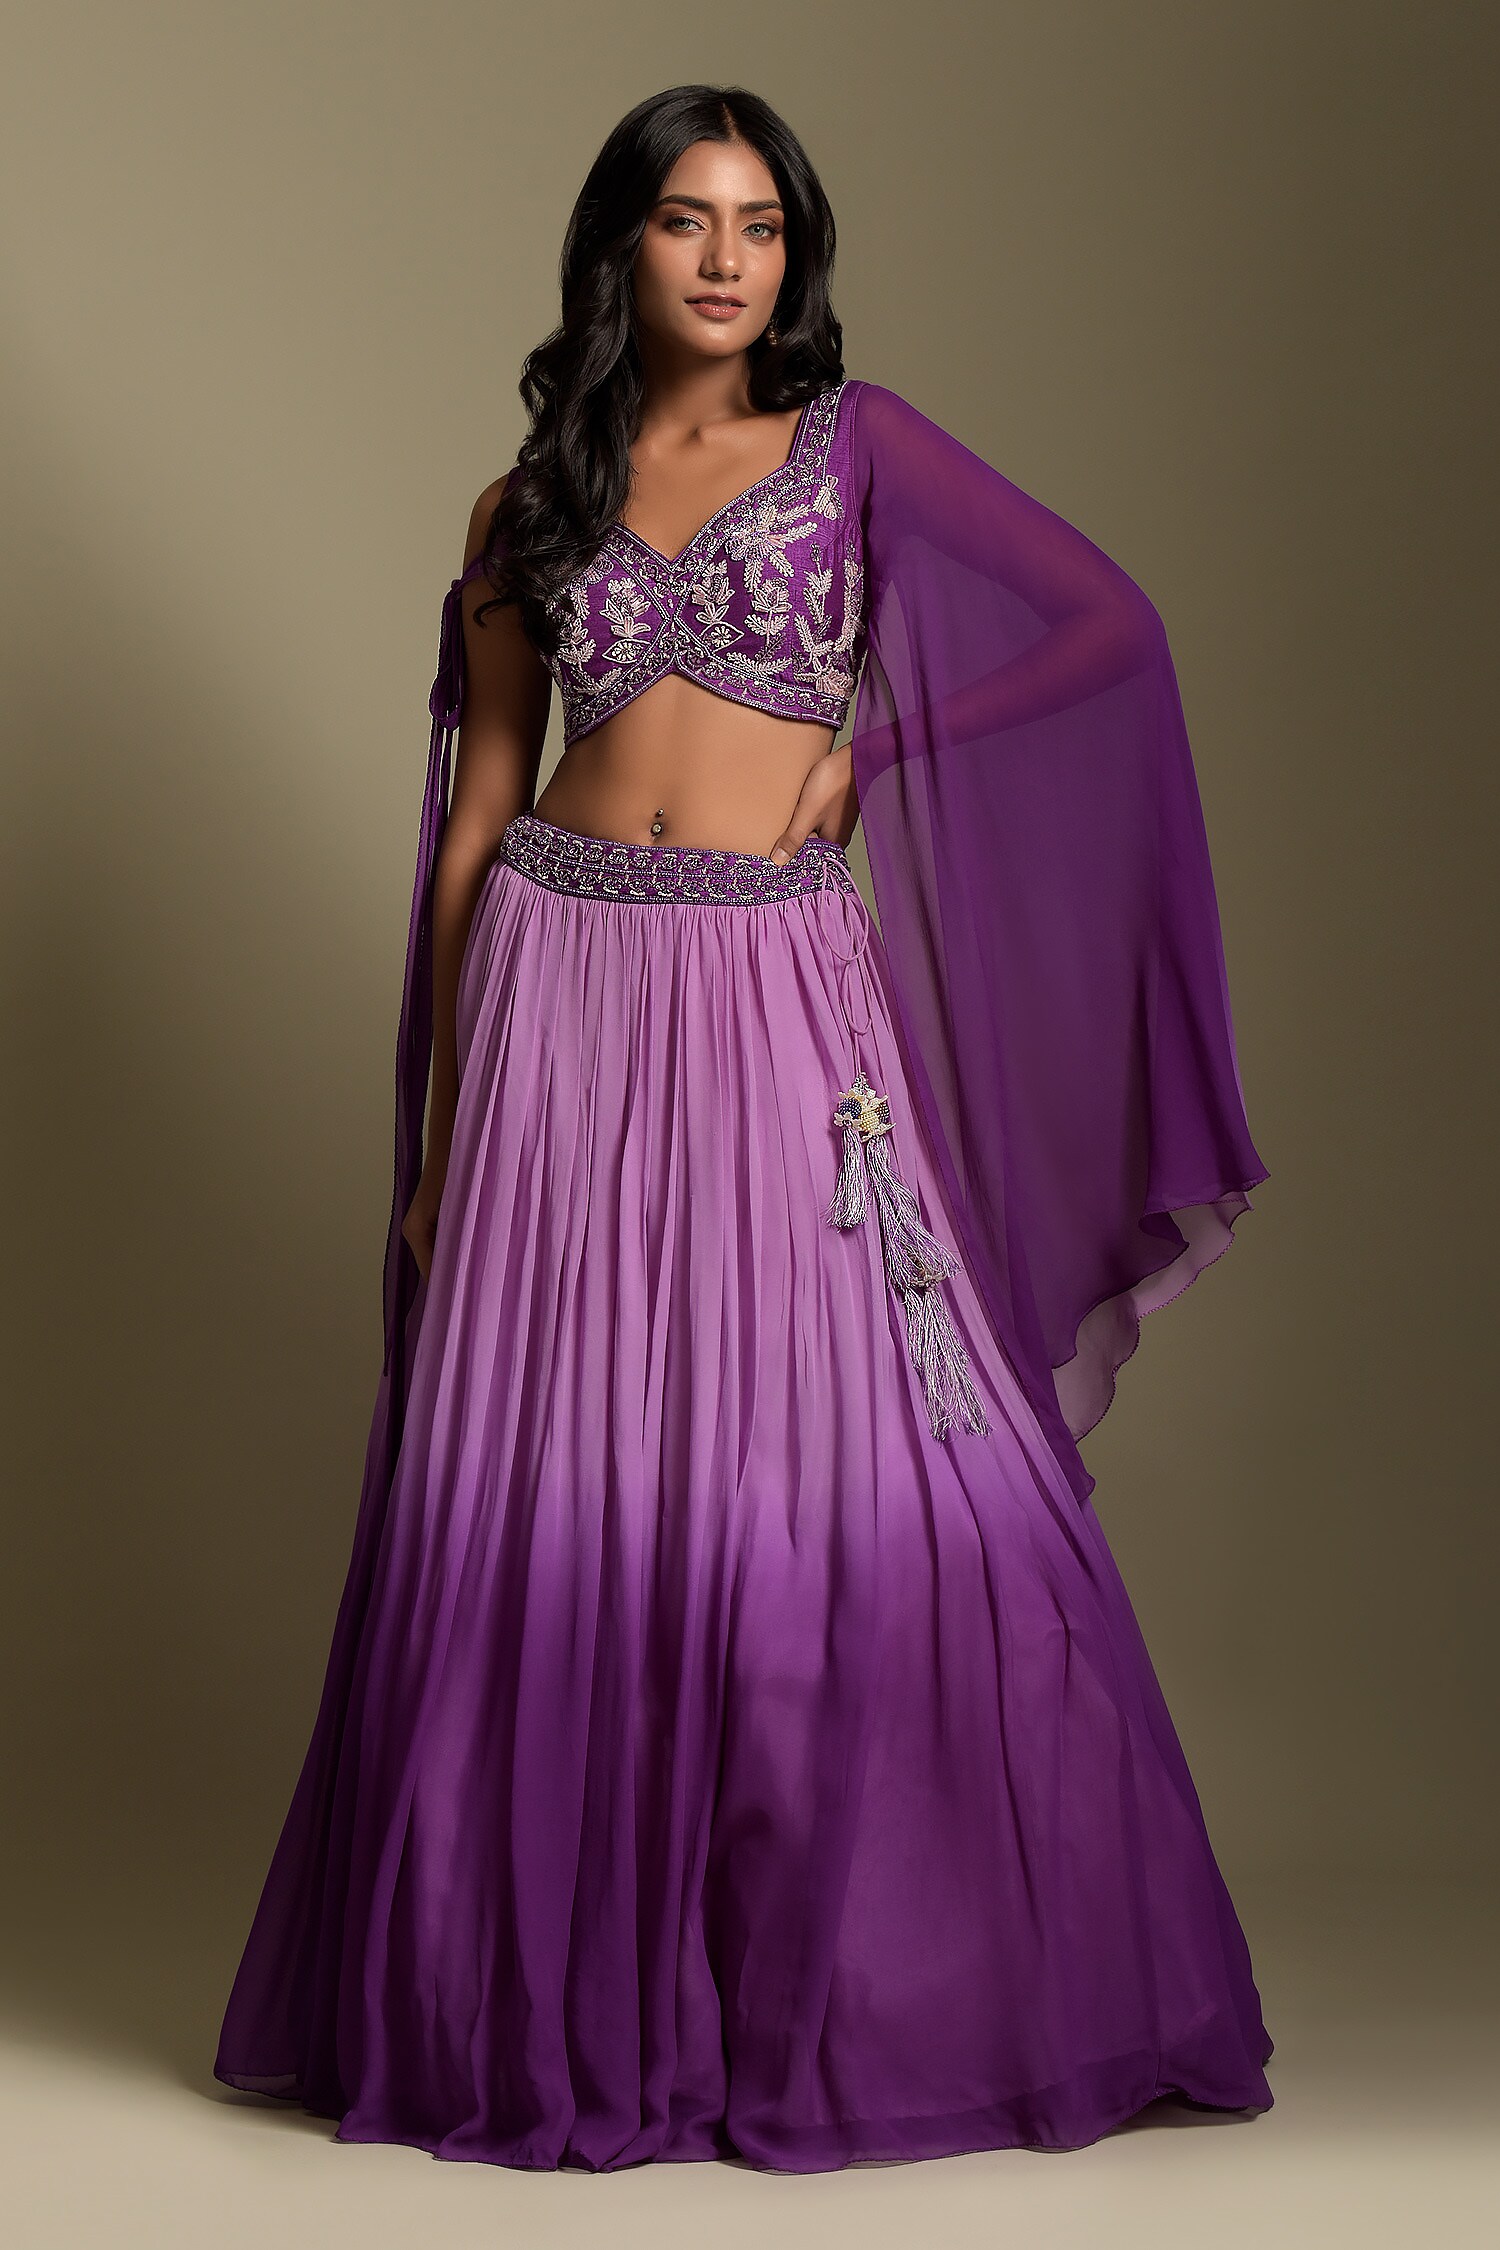 Two Sisters By Gyans Purple Ombre Lehenga And Embroidered Blouse Set